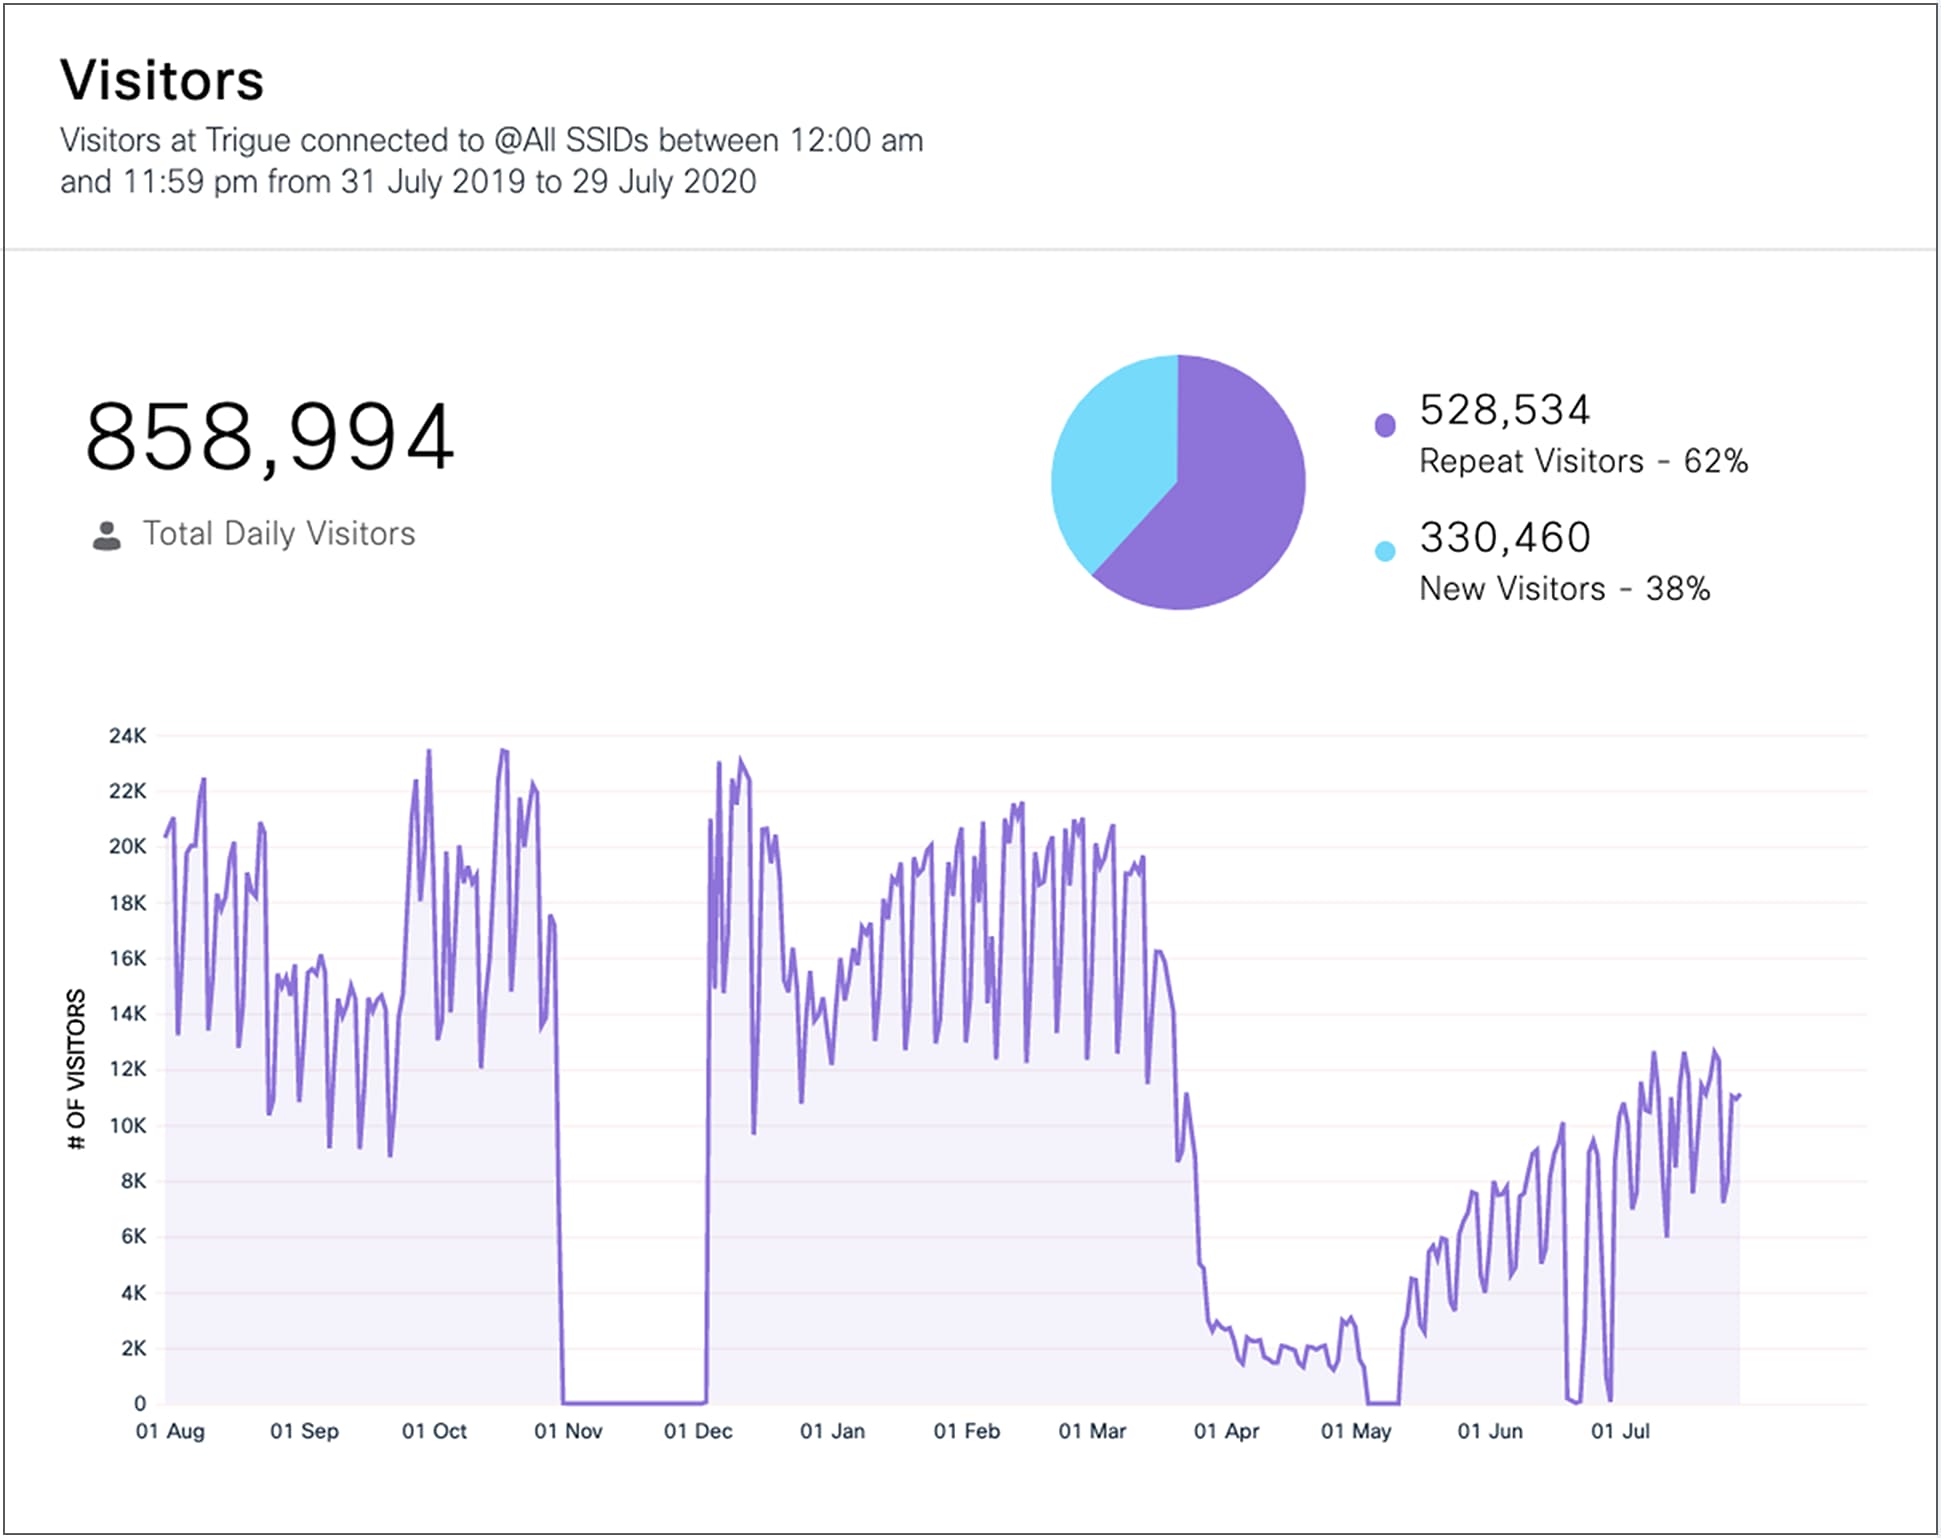 Location Analytics displays the number of daily visitors, as well as a breakdown of repeat vs. new visitors, over a 1 year timeframe